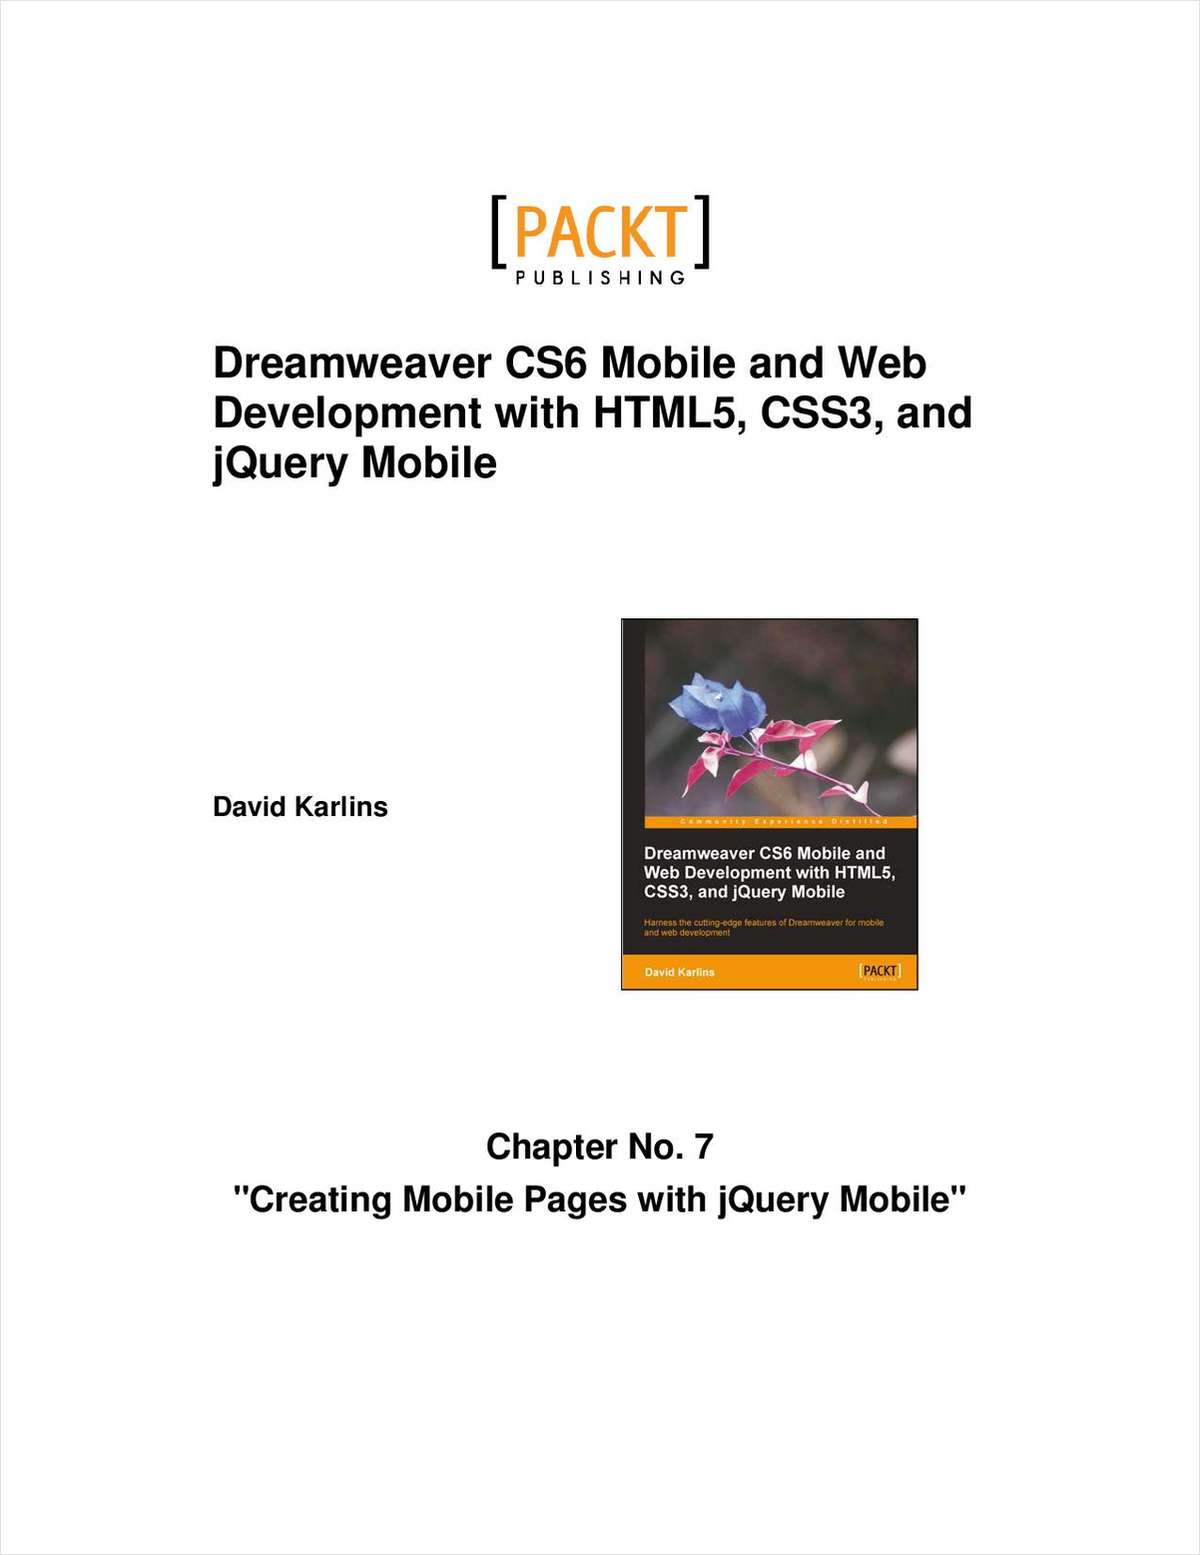 Dreamweaver CS6 Mobile and Web Development with HTML5, CSS3, and jQuery Mobile--Free 26 Page Excerpt